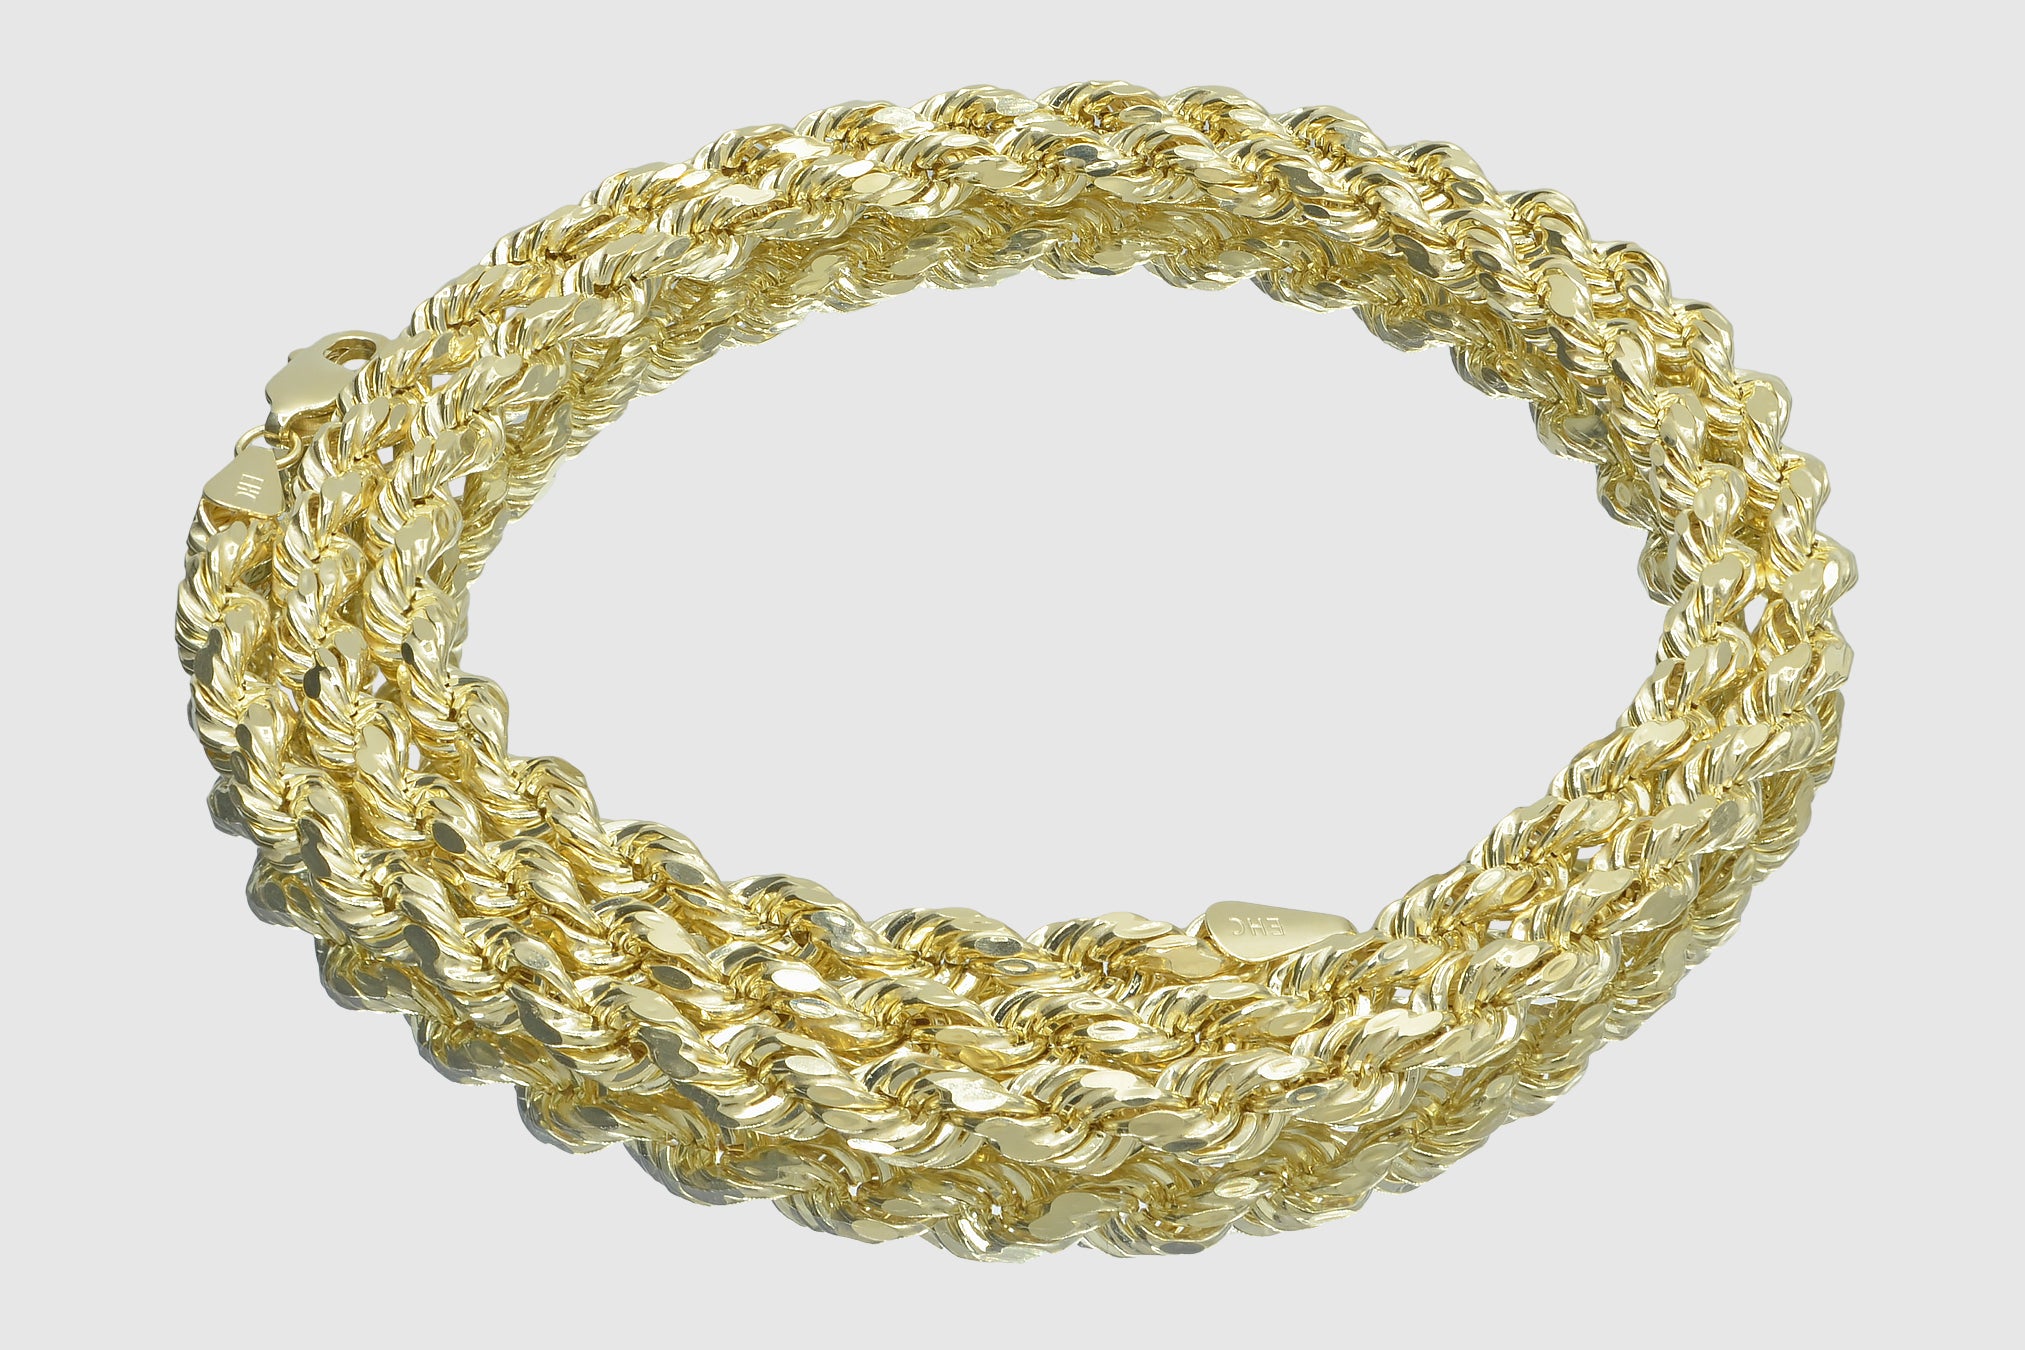 7mm Rope Solid Diamond Cut Chain 14K Gold